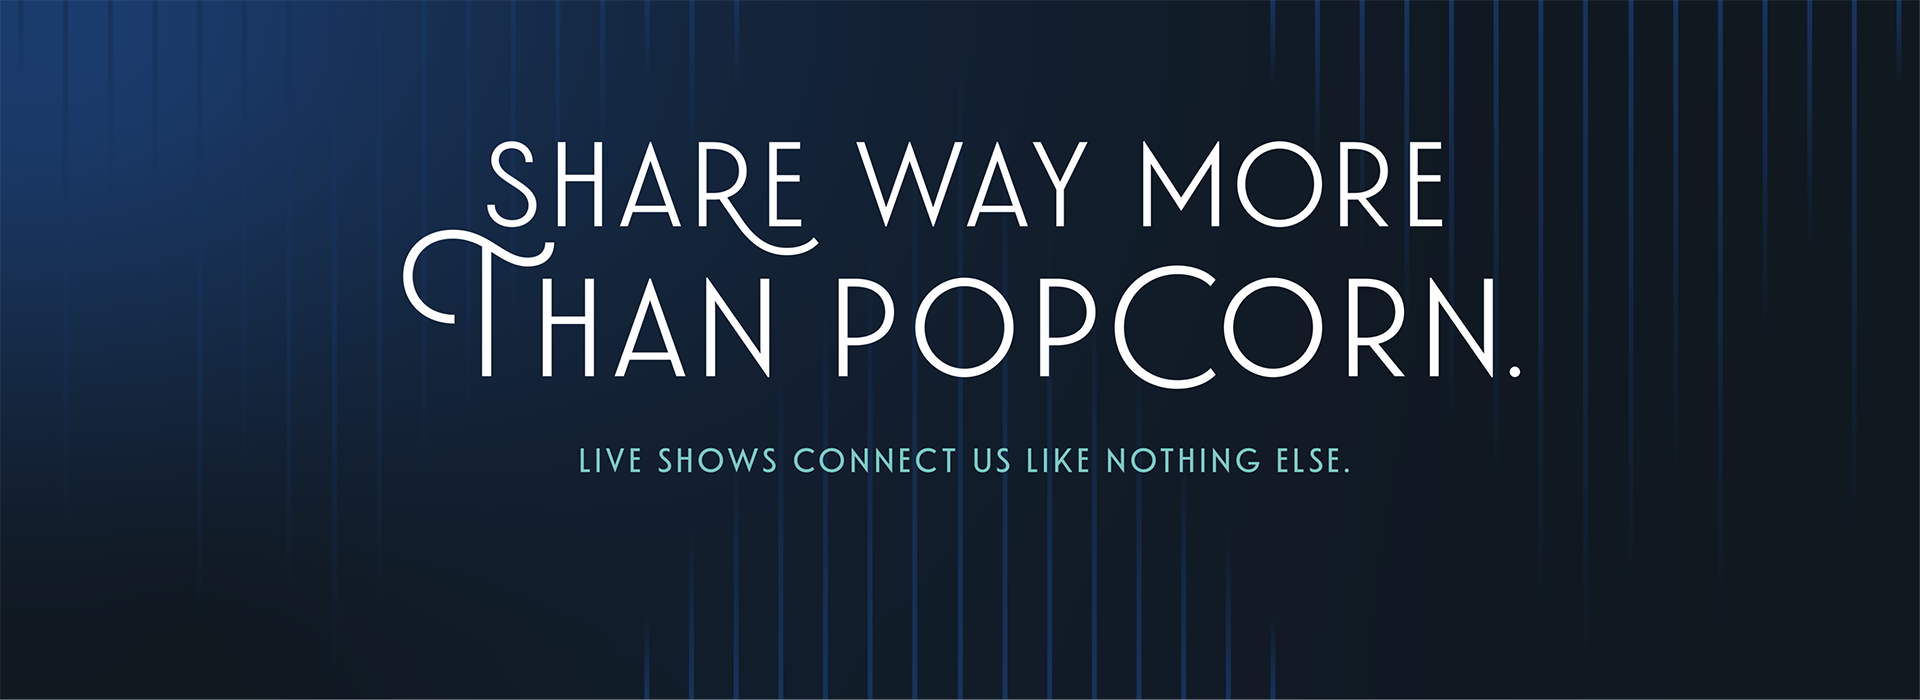 Share way more than popcorn. Live shows connect us like nothing else.